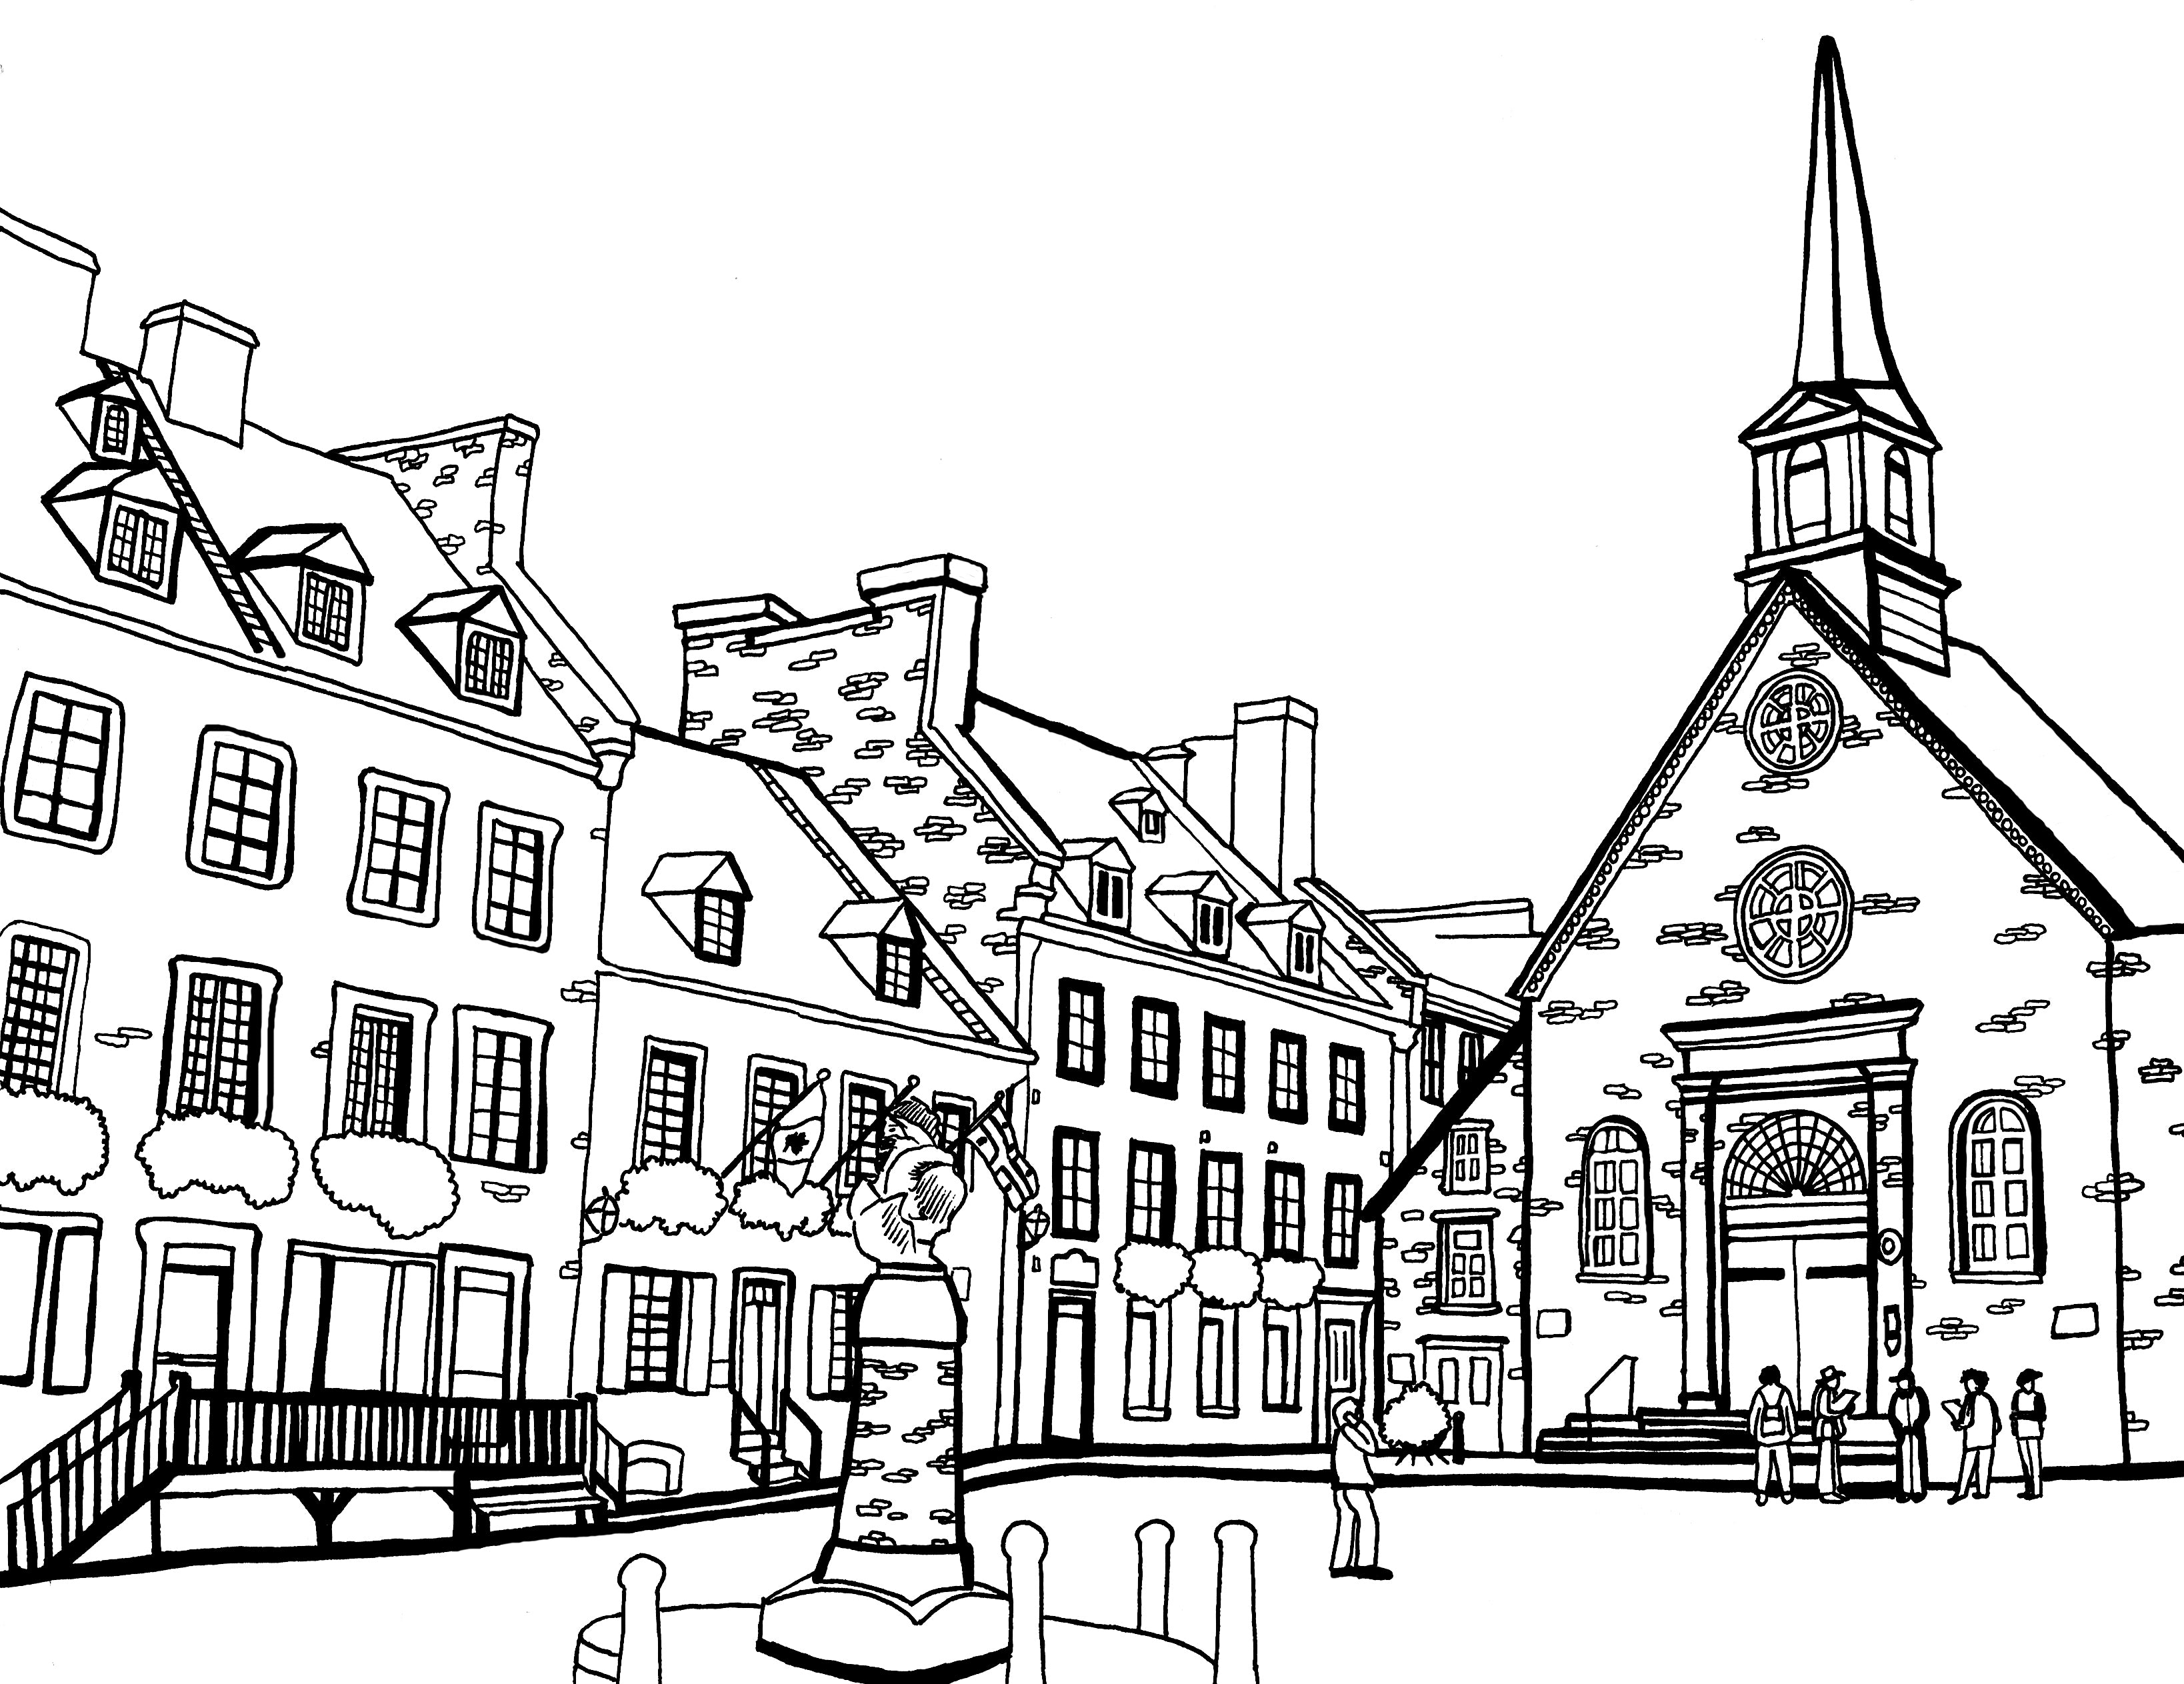 Black and white line drawing of Église Notre-Dame-des-Victoires in Quebec City for a coloring page, depicting the quaint, historic architecture of the church with its distinctive steeple and facade, alongside the traditional stone buildings of Place Royale, with pedestrians adding life to the serene setting. Free coloring page :: You-Color